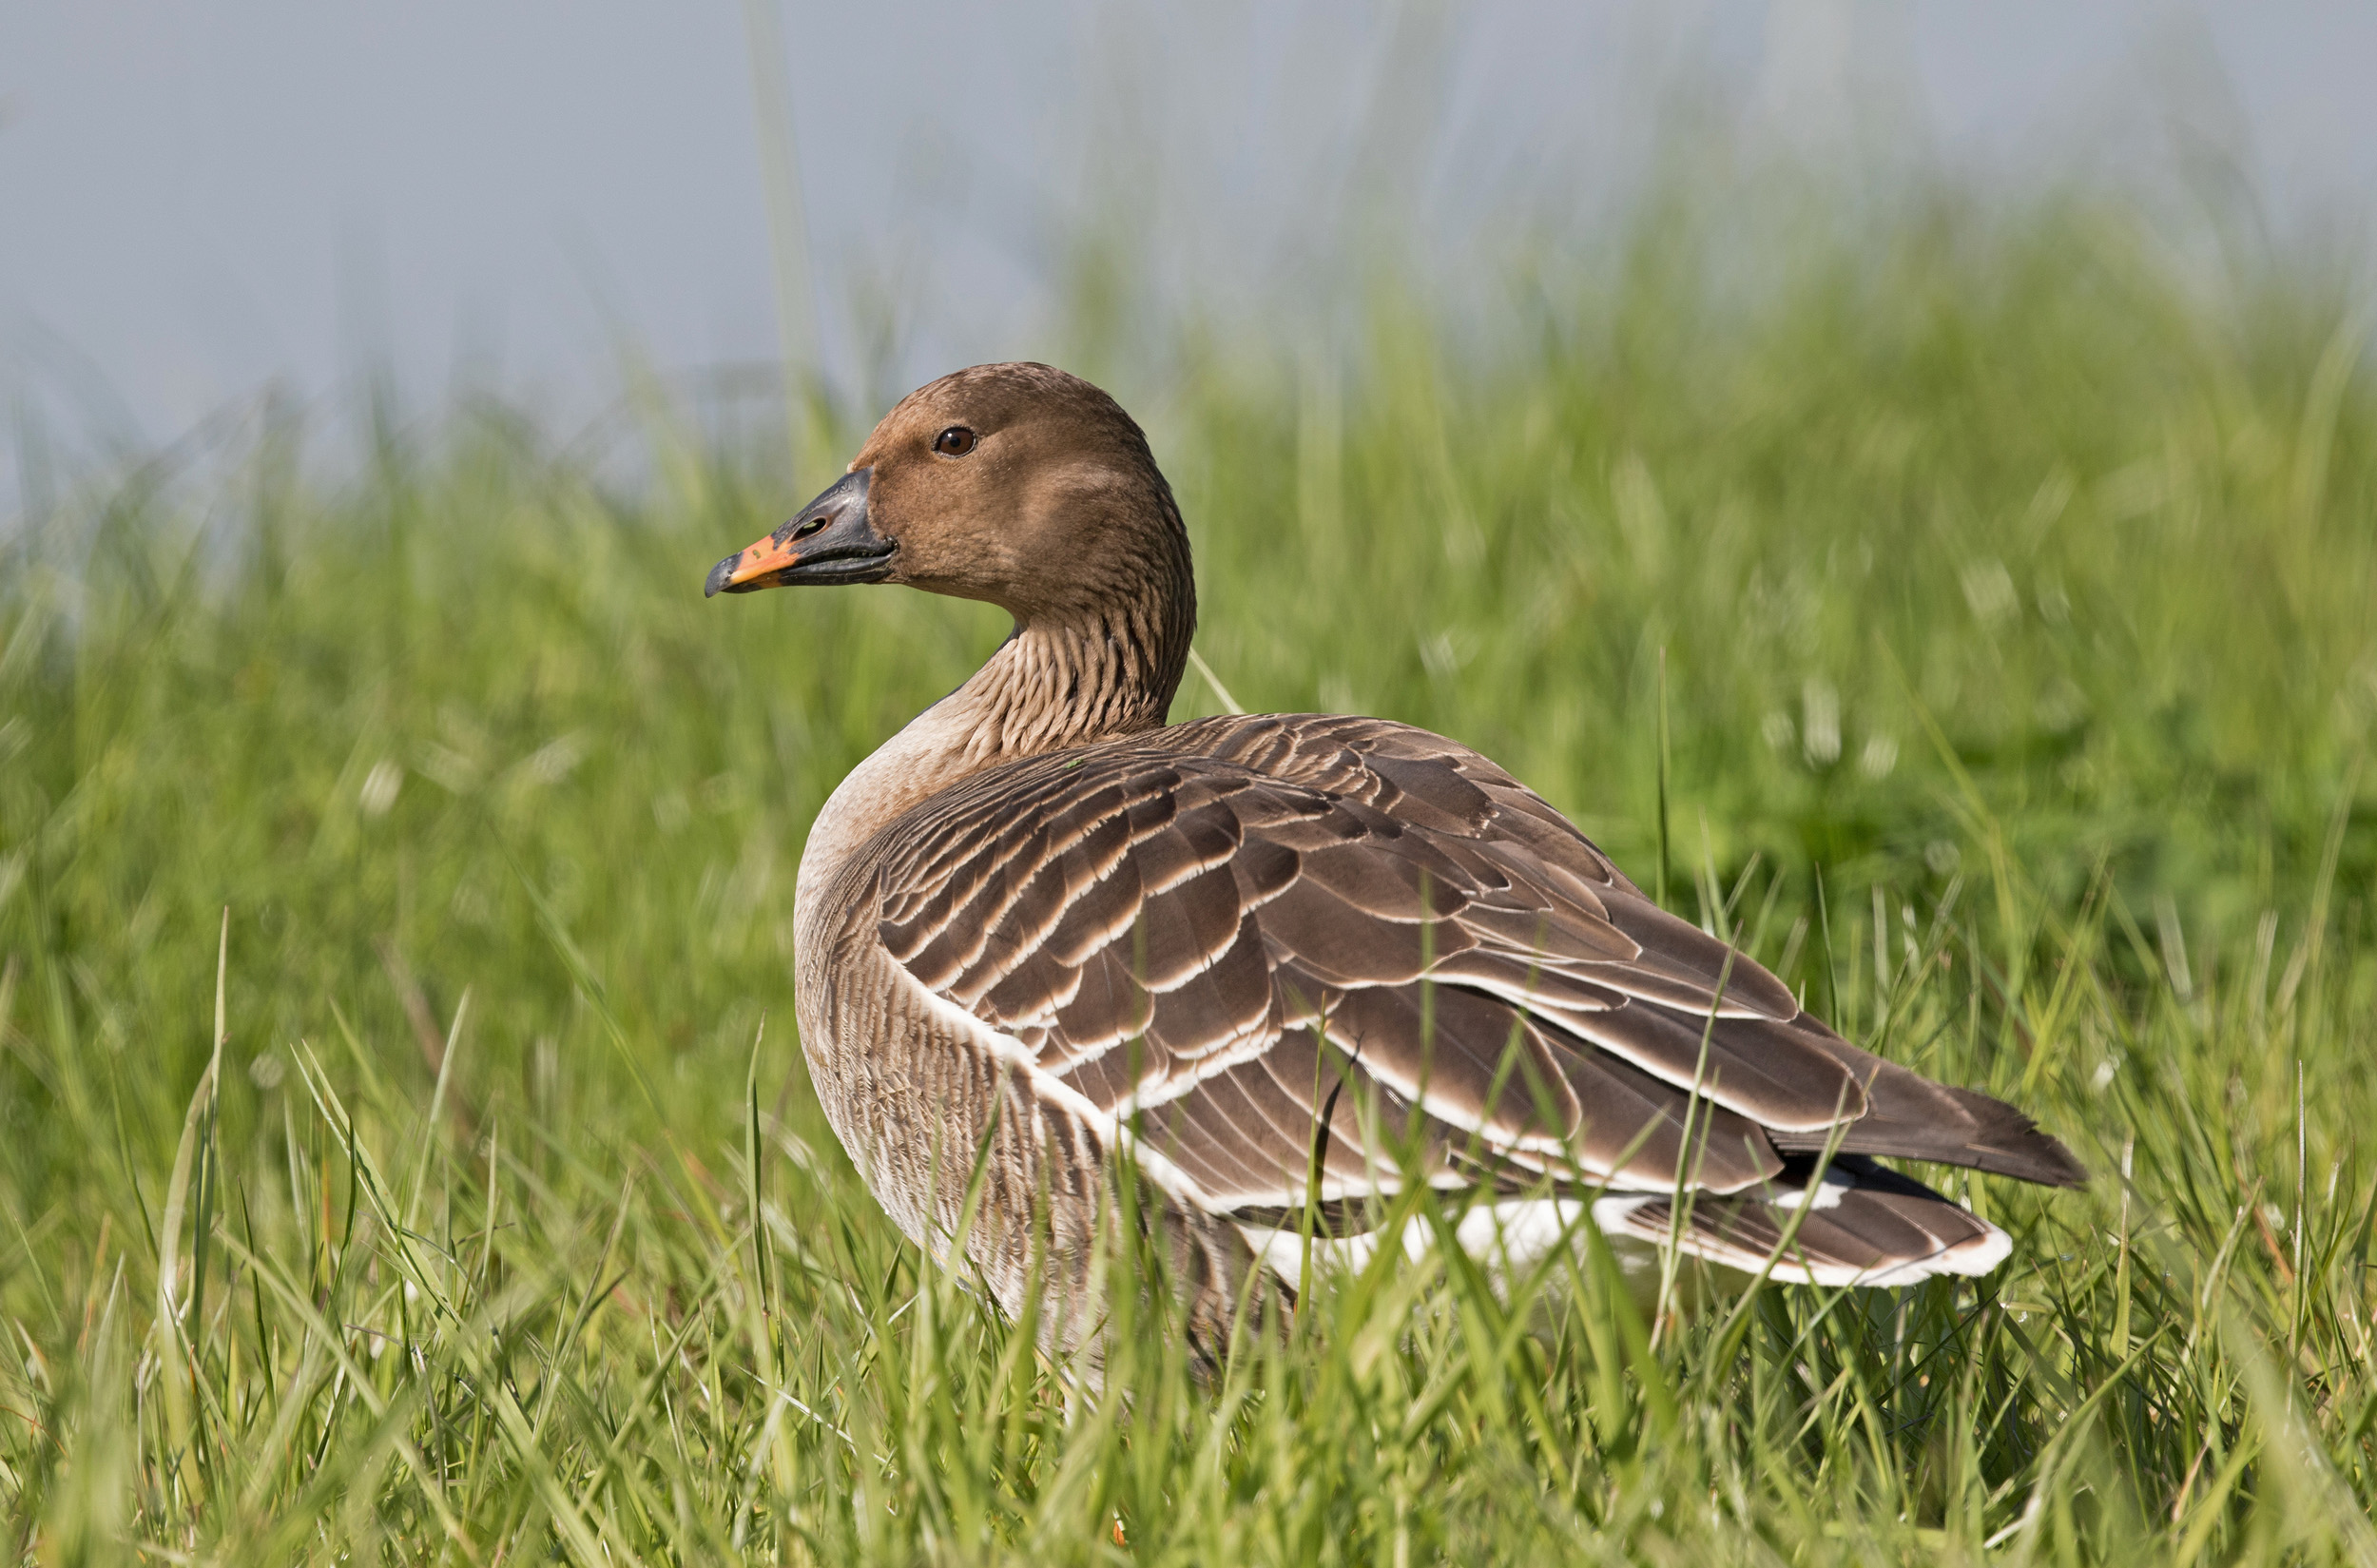 Lone Tundra Bean Goose perched in a grassy field next to water.